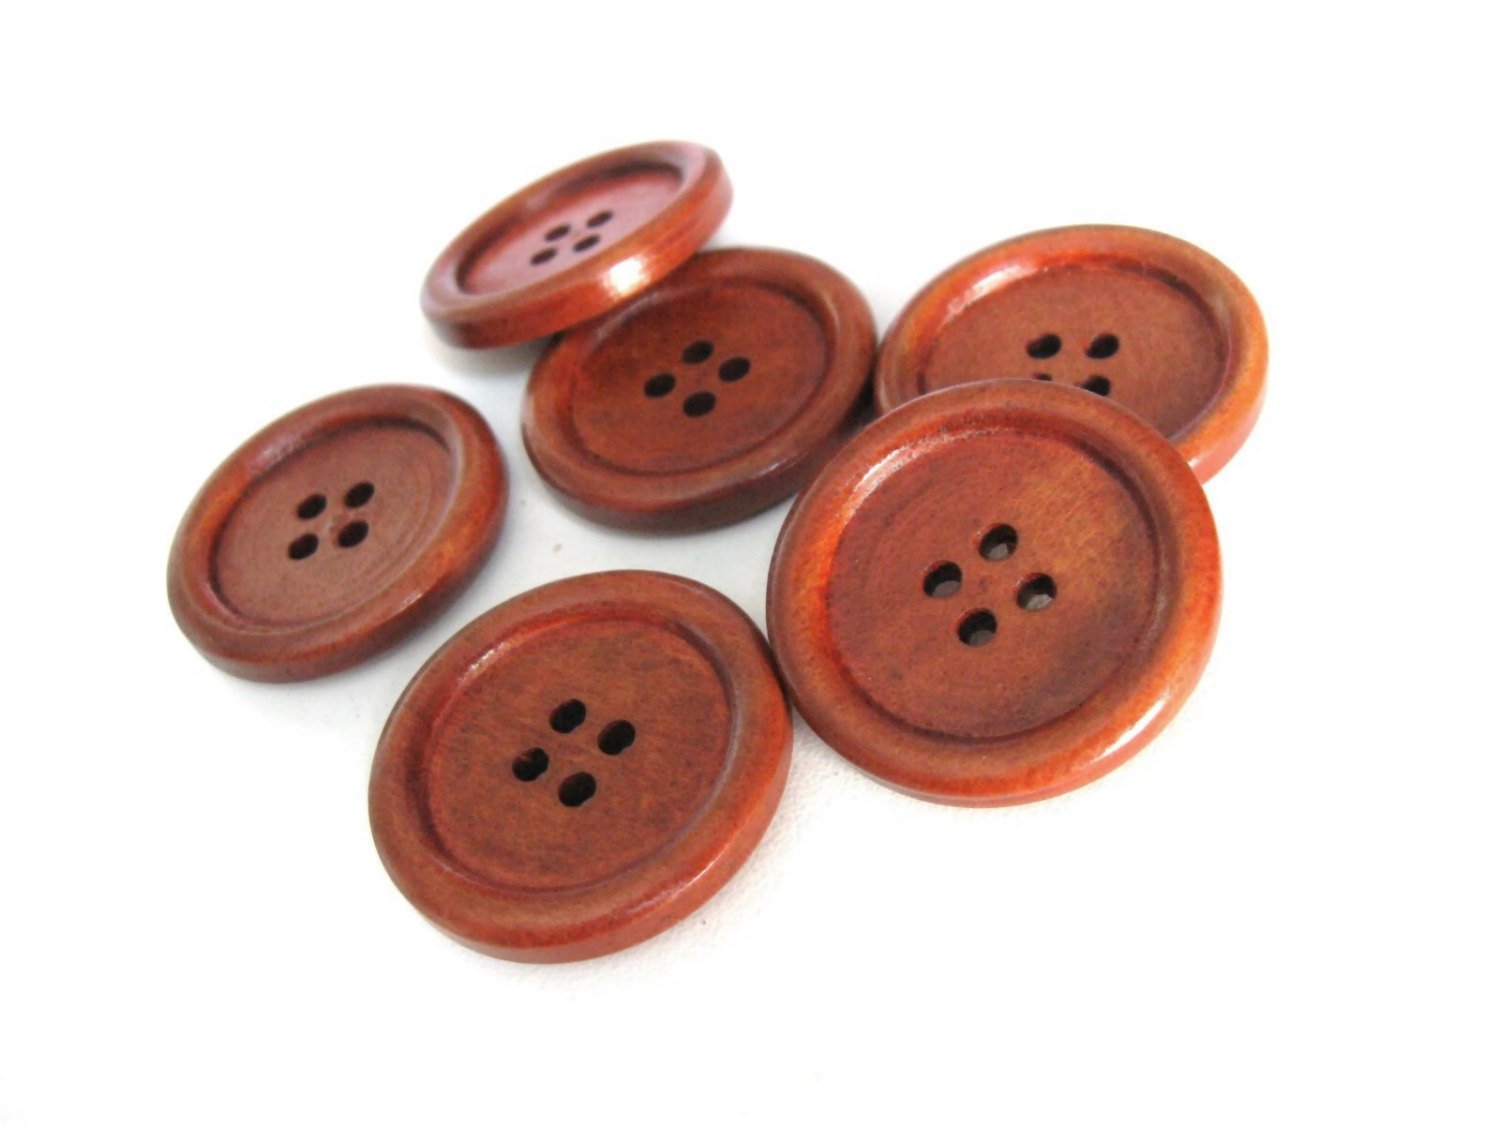 Maroon brown Wooden Sewing Buttons 30mm - set of 6 natural wood button